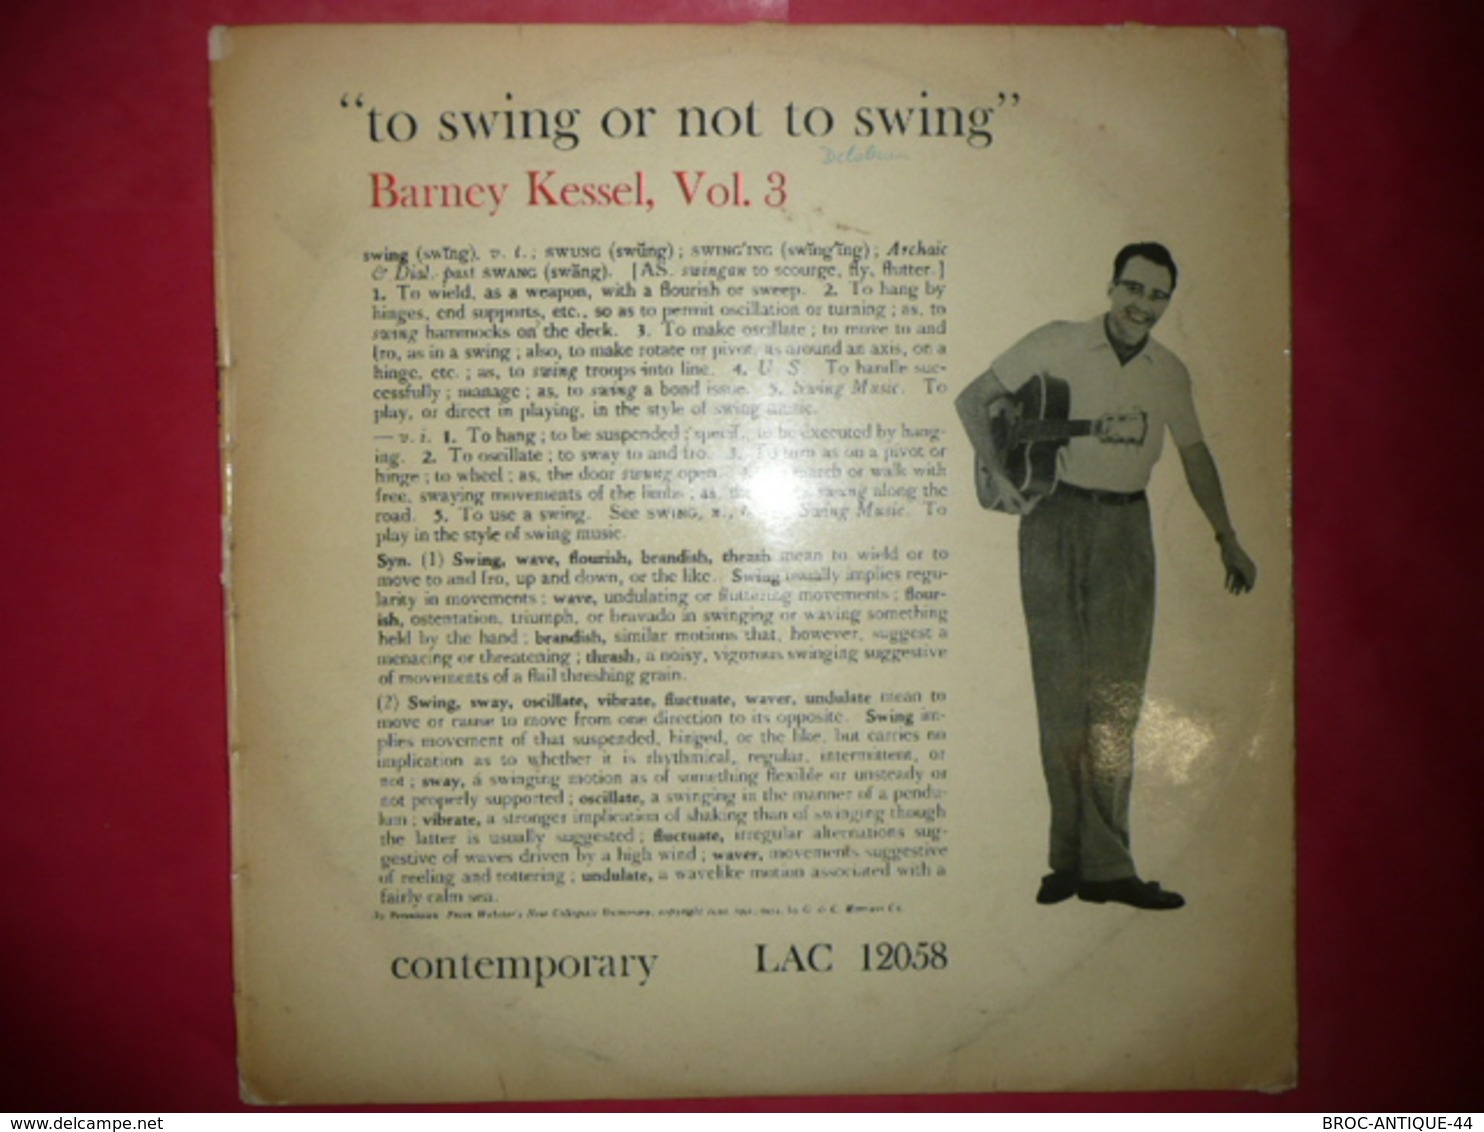 LP33 N°4070 - BARNEY KESSEL - TO SWING OR NOT TO SWING - LAC 12058 - DISQUE EPAIS VOGUE - Jazz